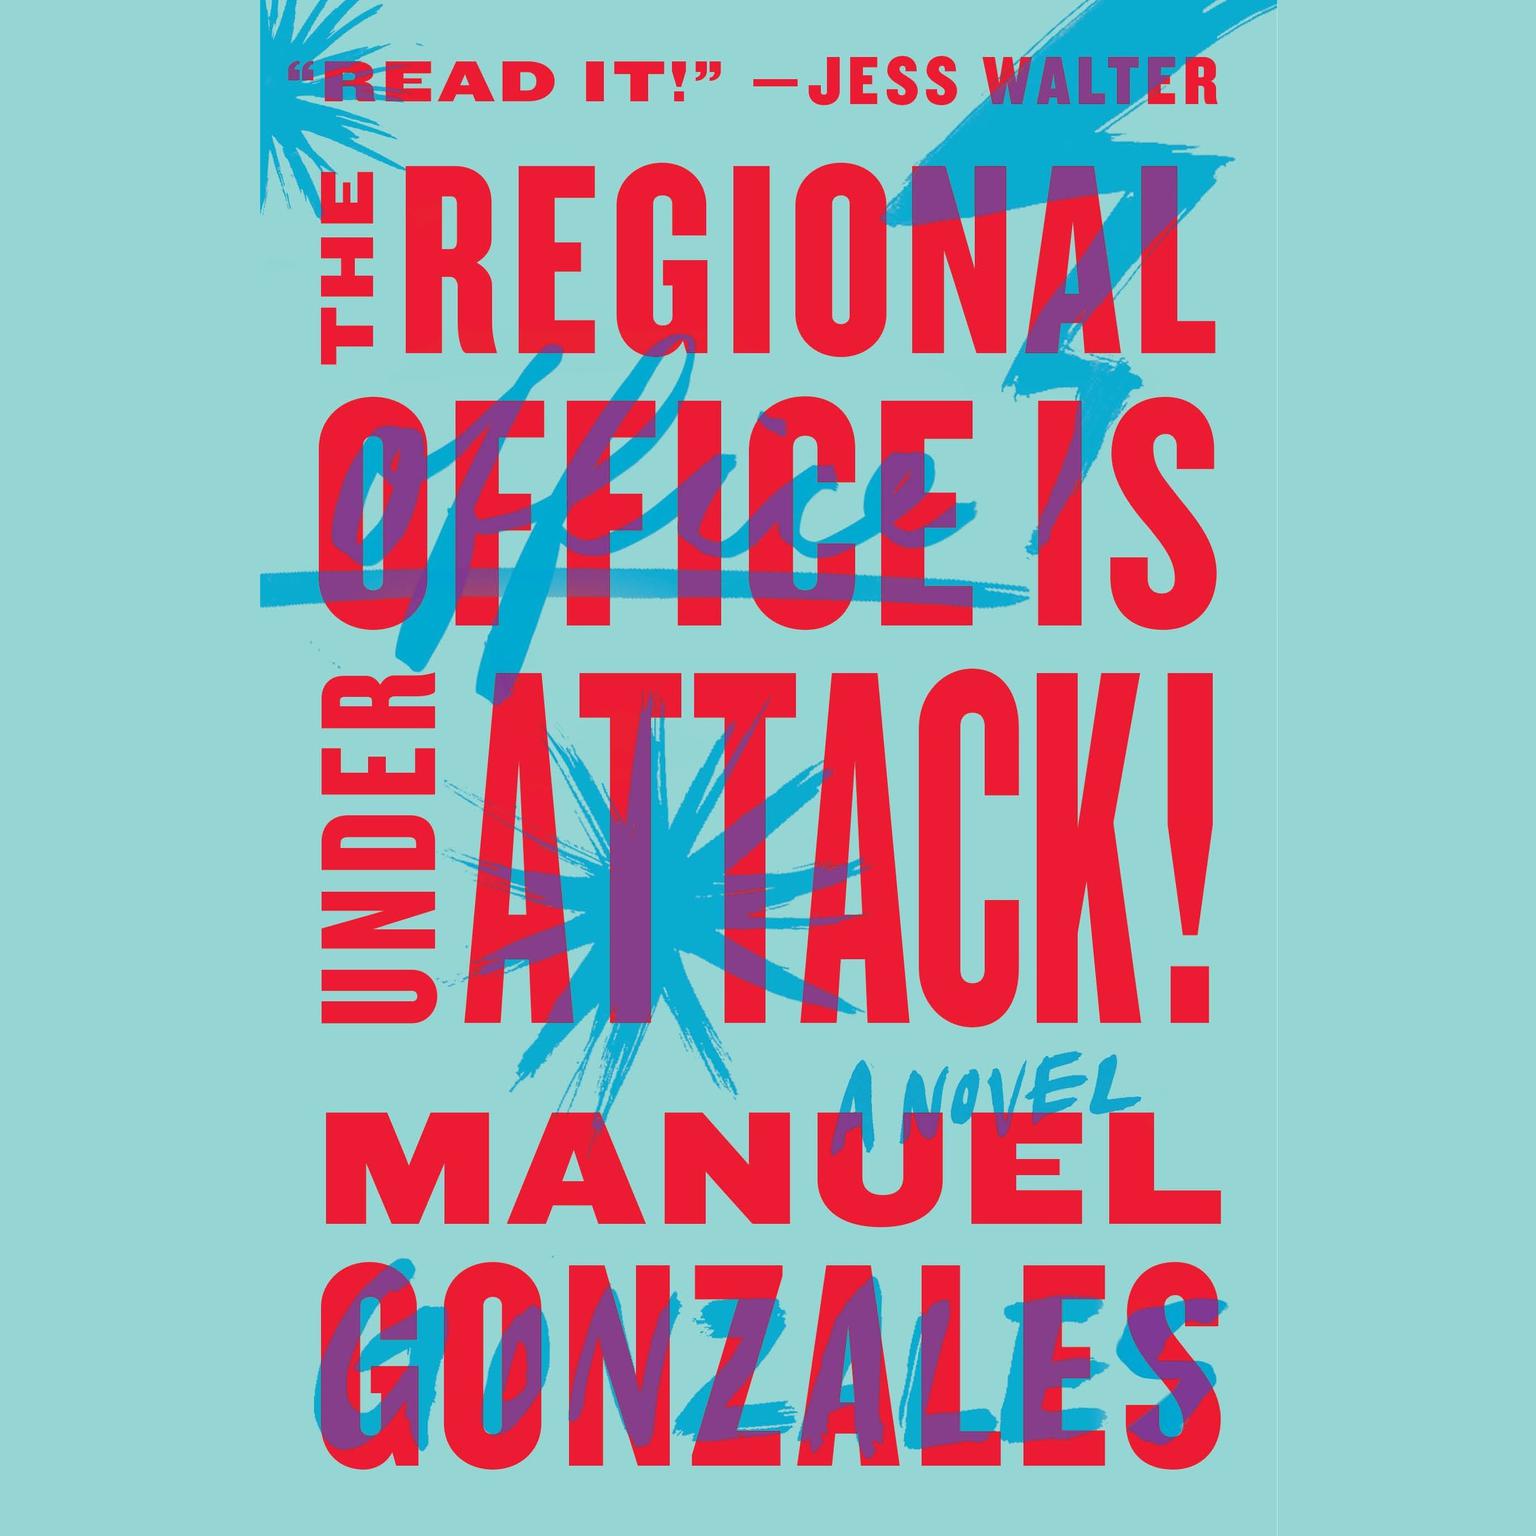 The Regional Office Is Under Attack!: A Novel Audiobook, by Manuel Gonzales